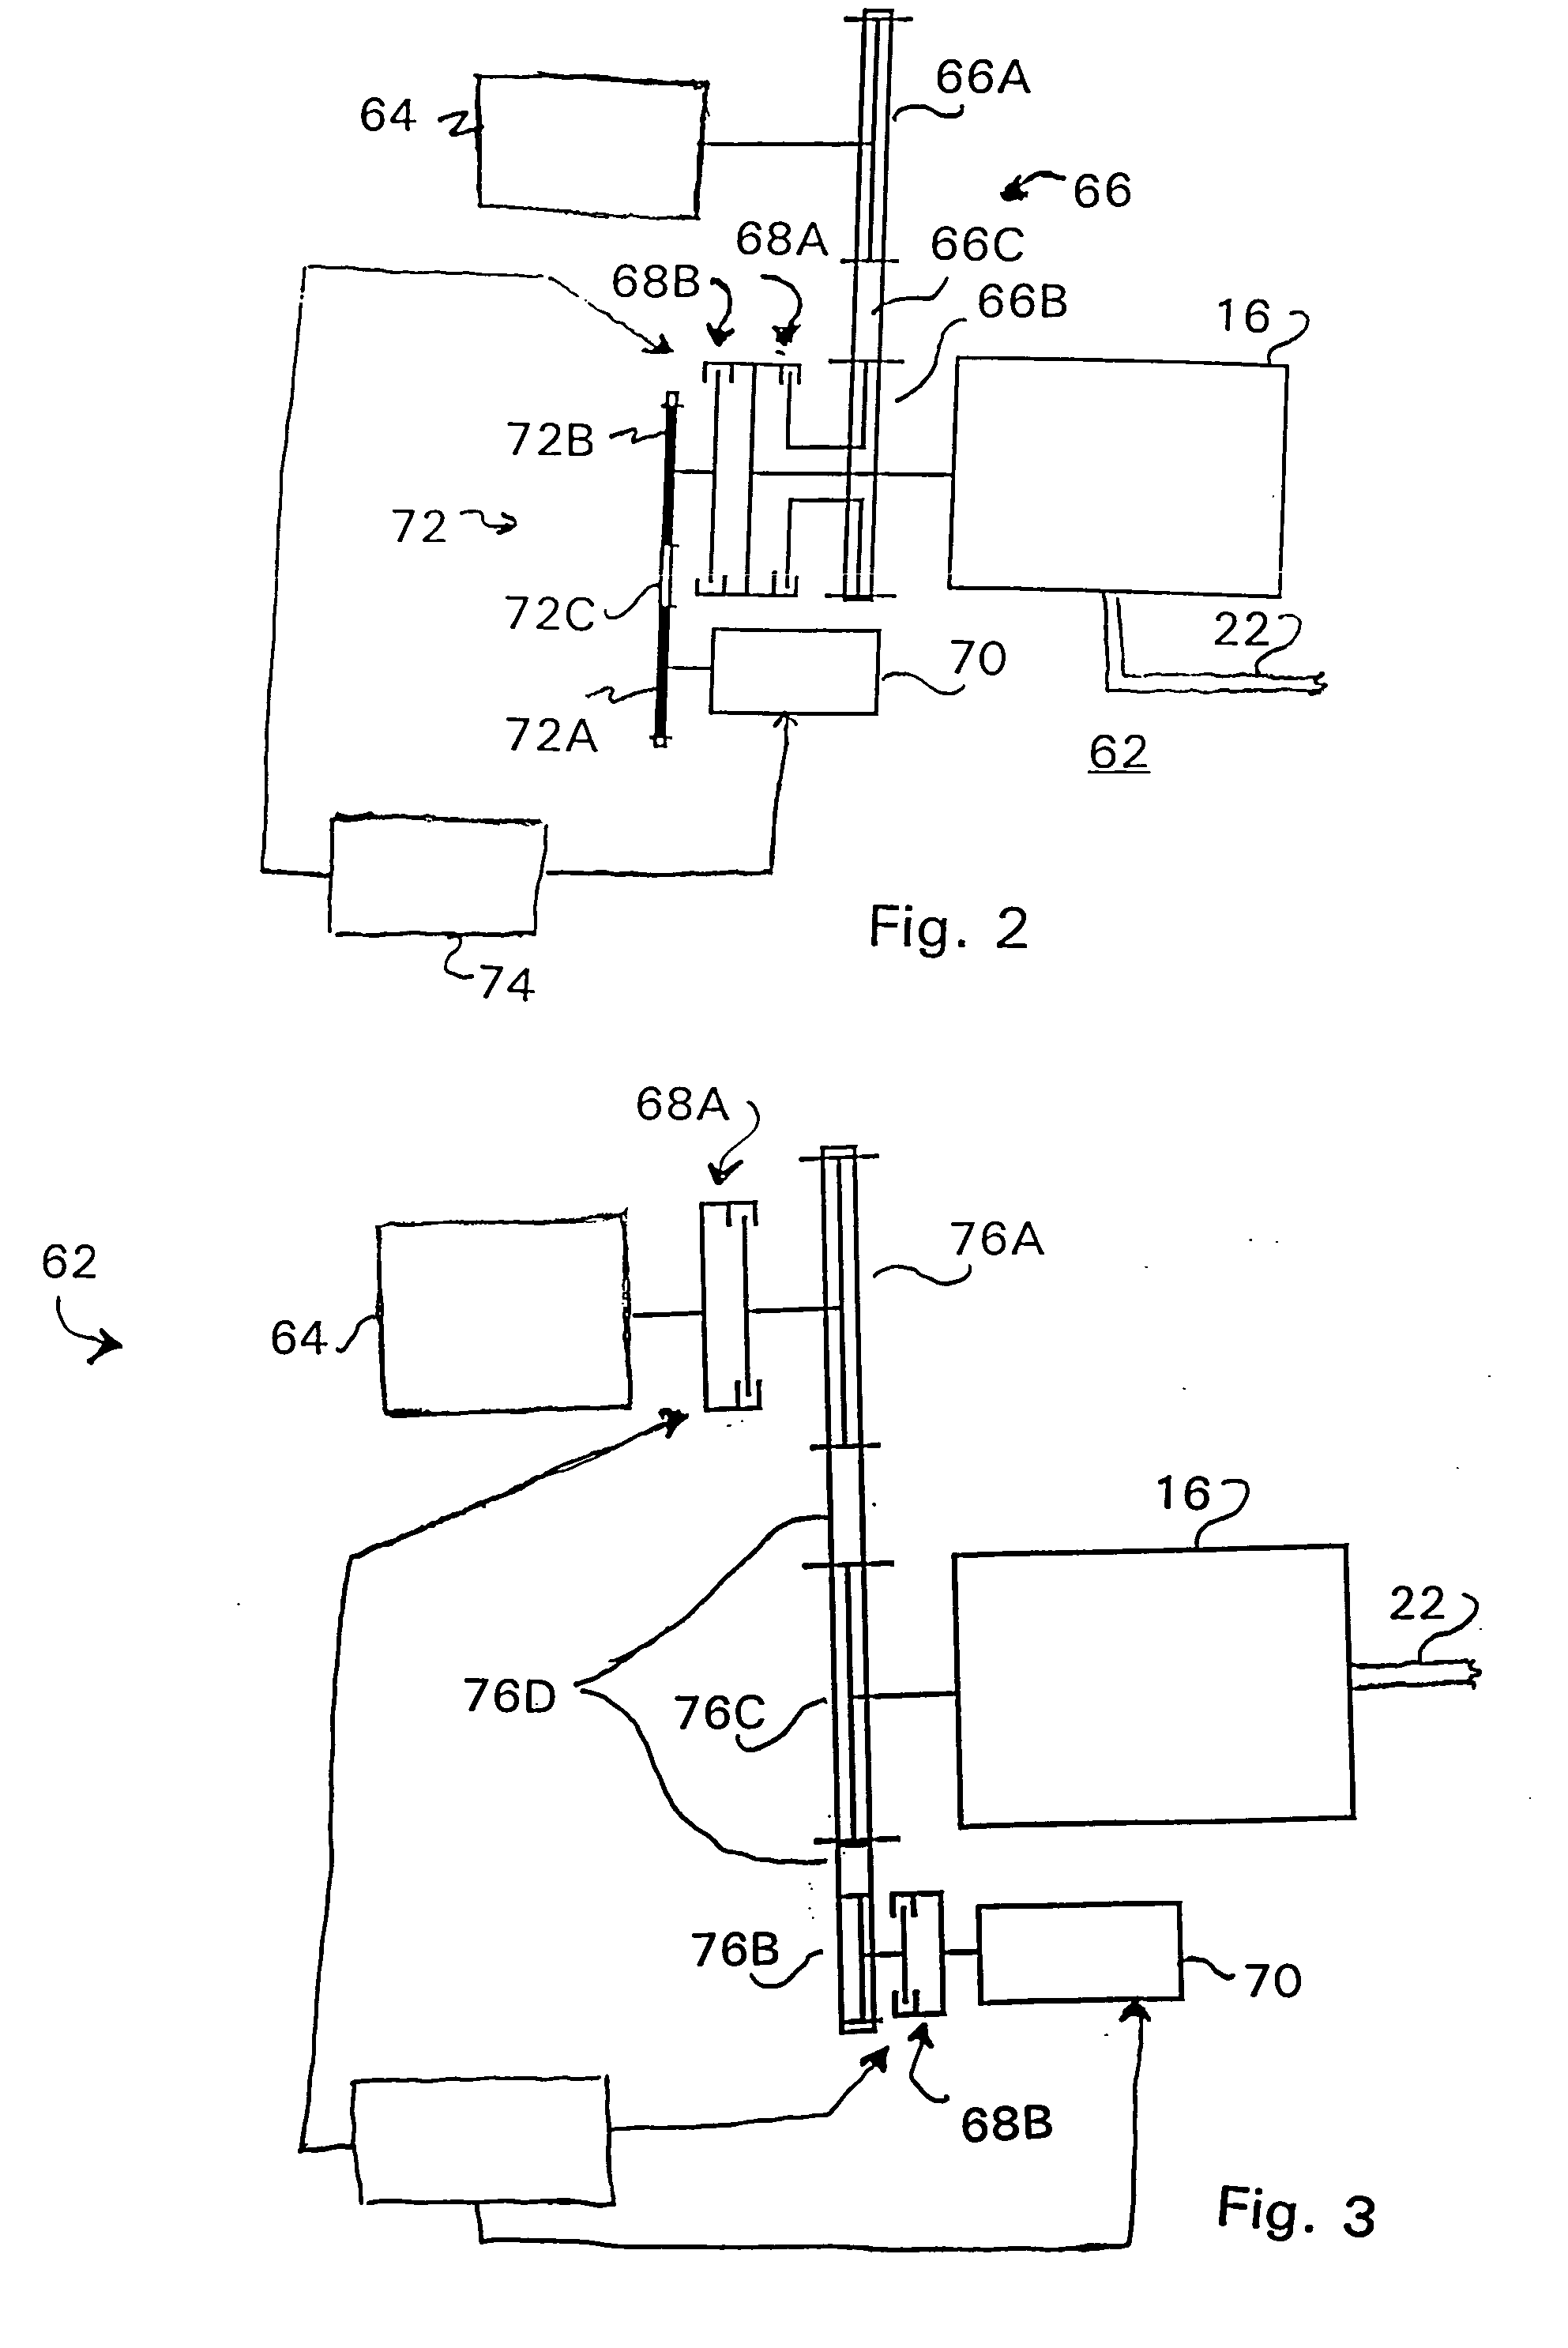 Method and apparatus for maintaining hydraulic pressure when a vehicle is stopped